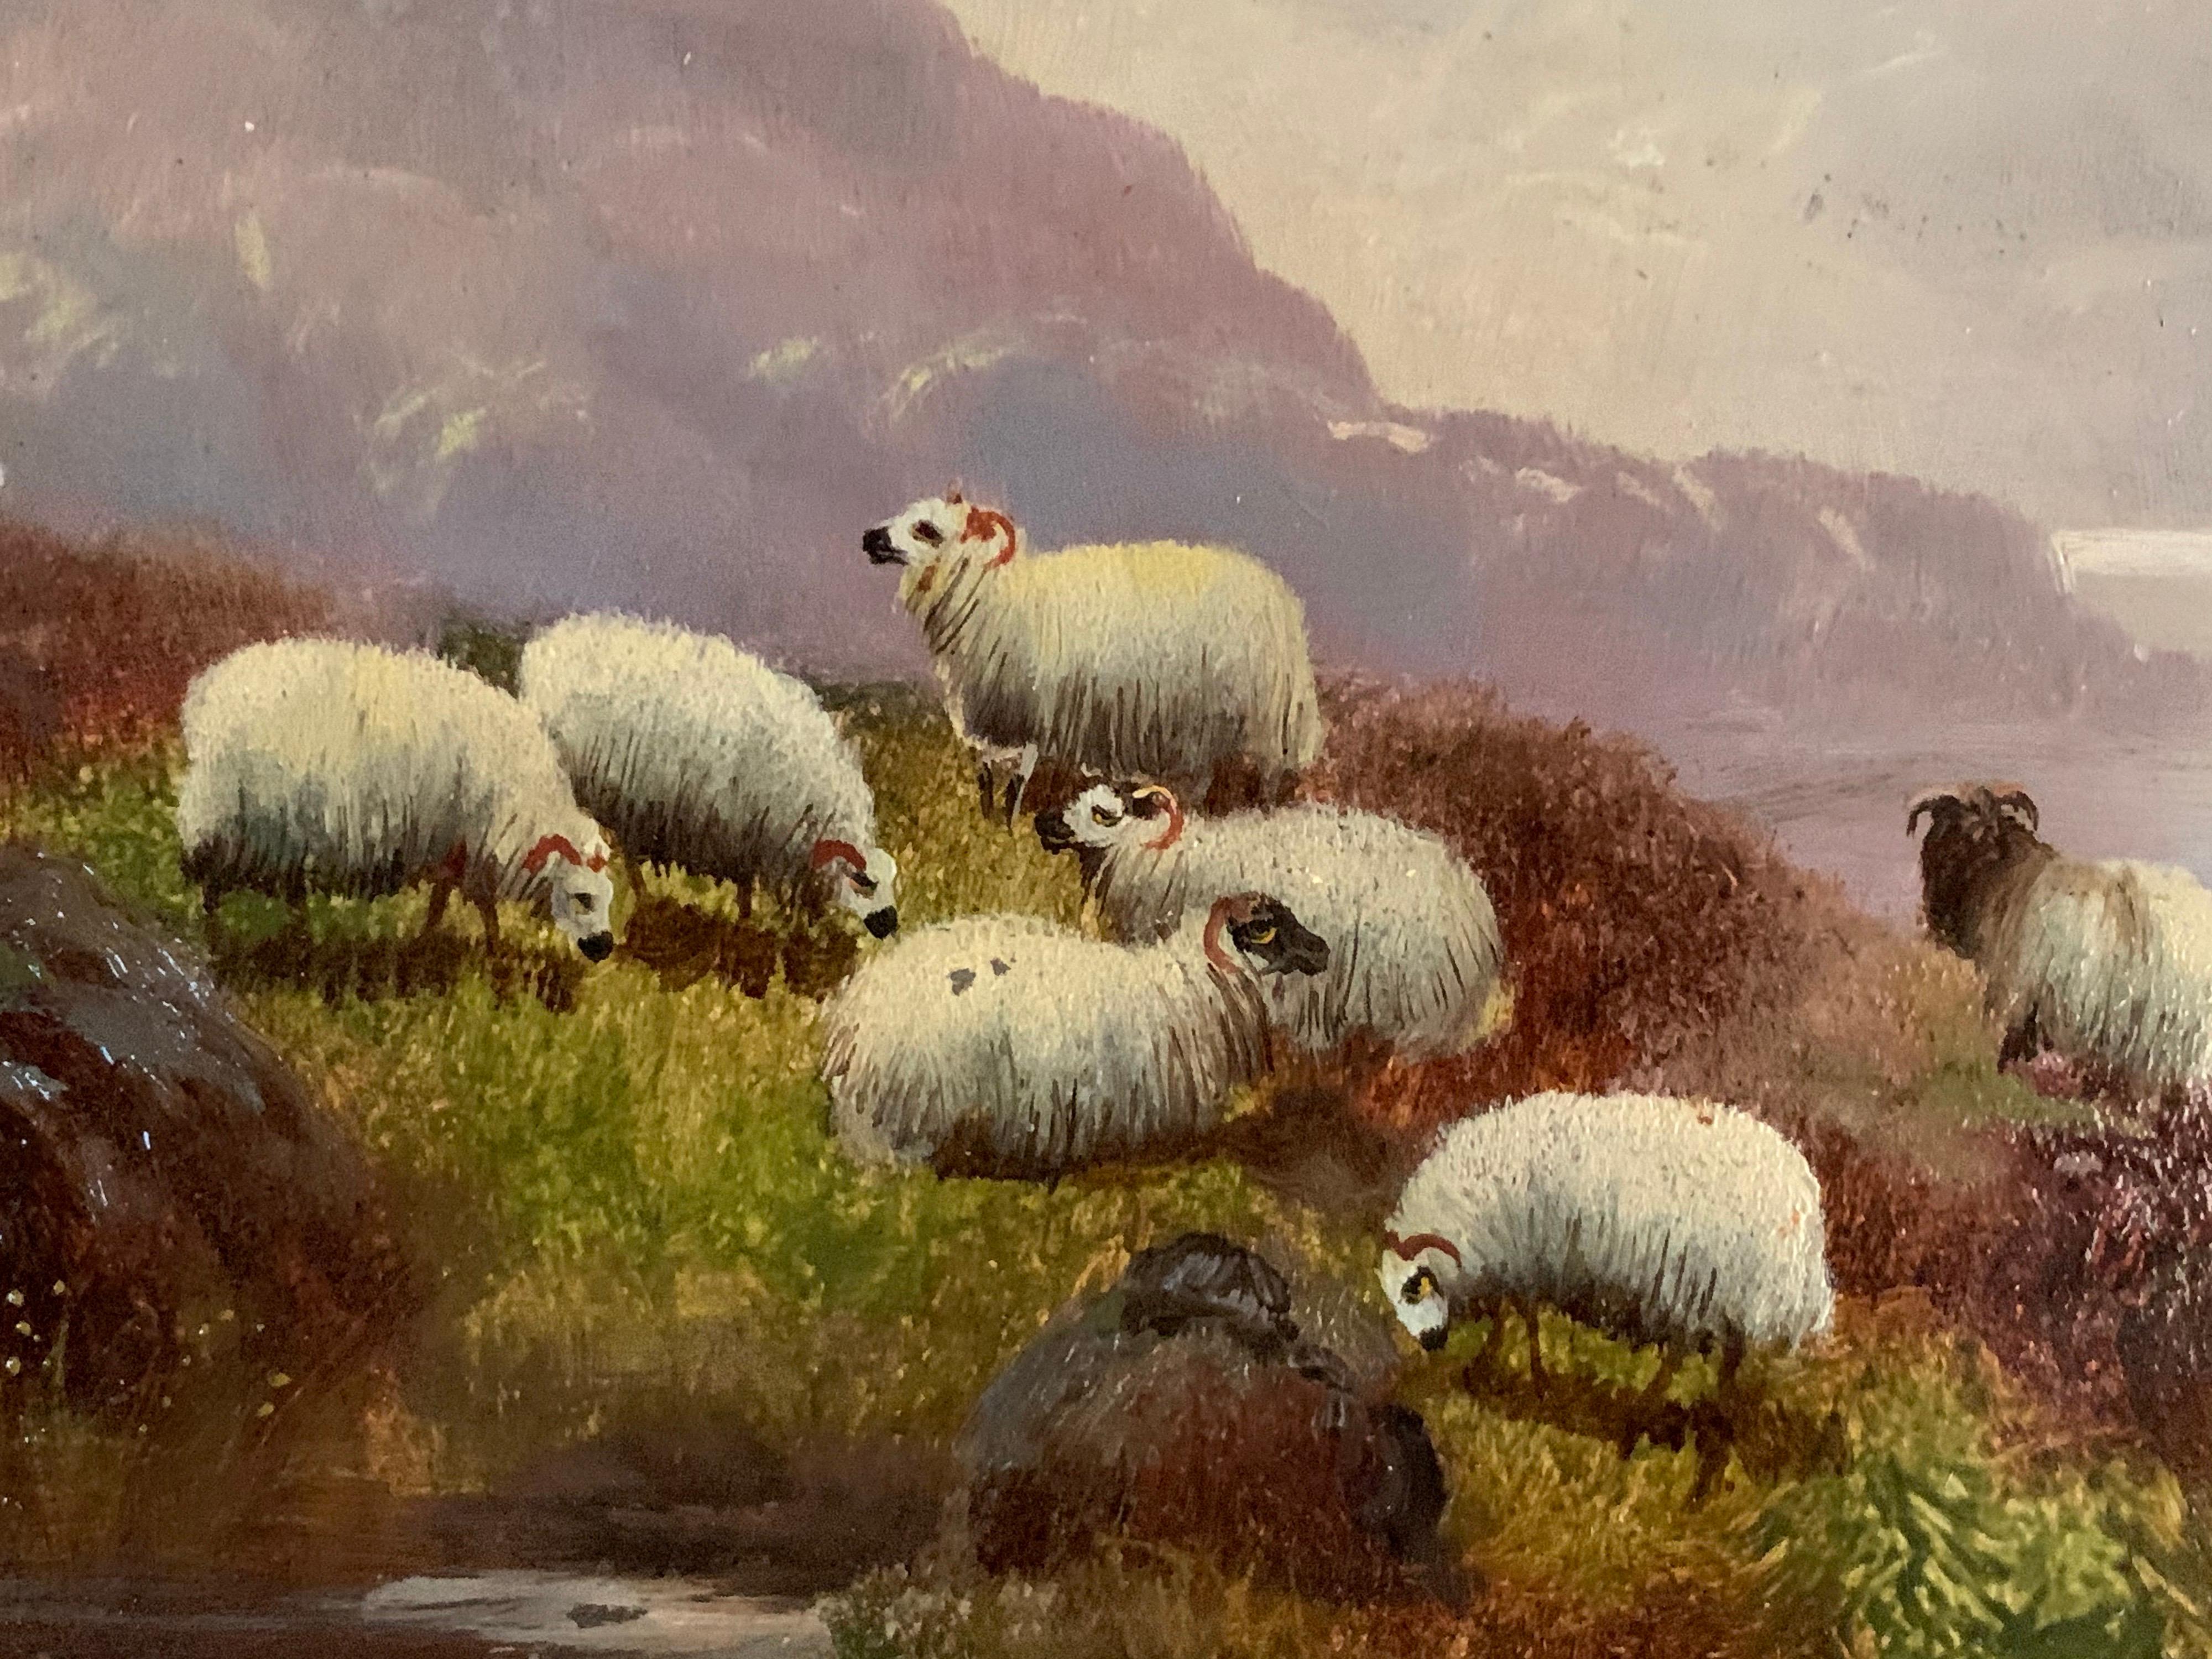 Highland Pastures
by John Shirley Fox (c. 1860-1939)
signed lower left corner
oil painting on board, framed
provenance: private collection, England

condition report: very good. 

JOHN SHIRLEY FOX RBA, 1867-1939, studied in Paris at the Ecole des